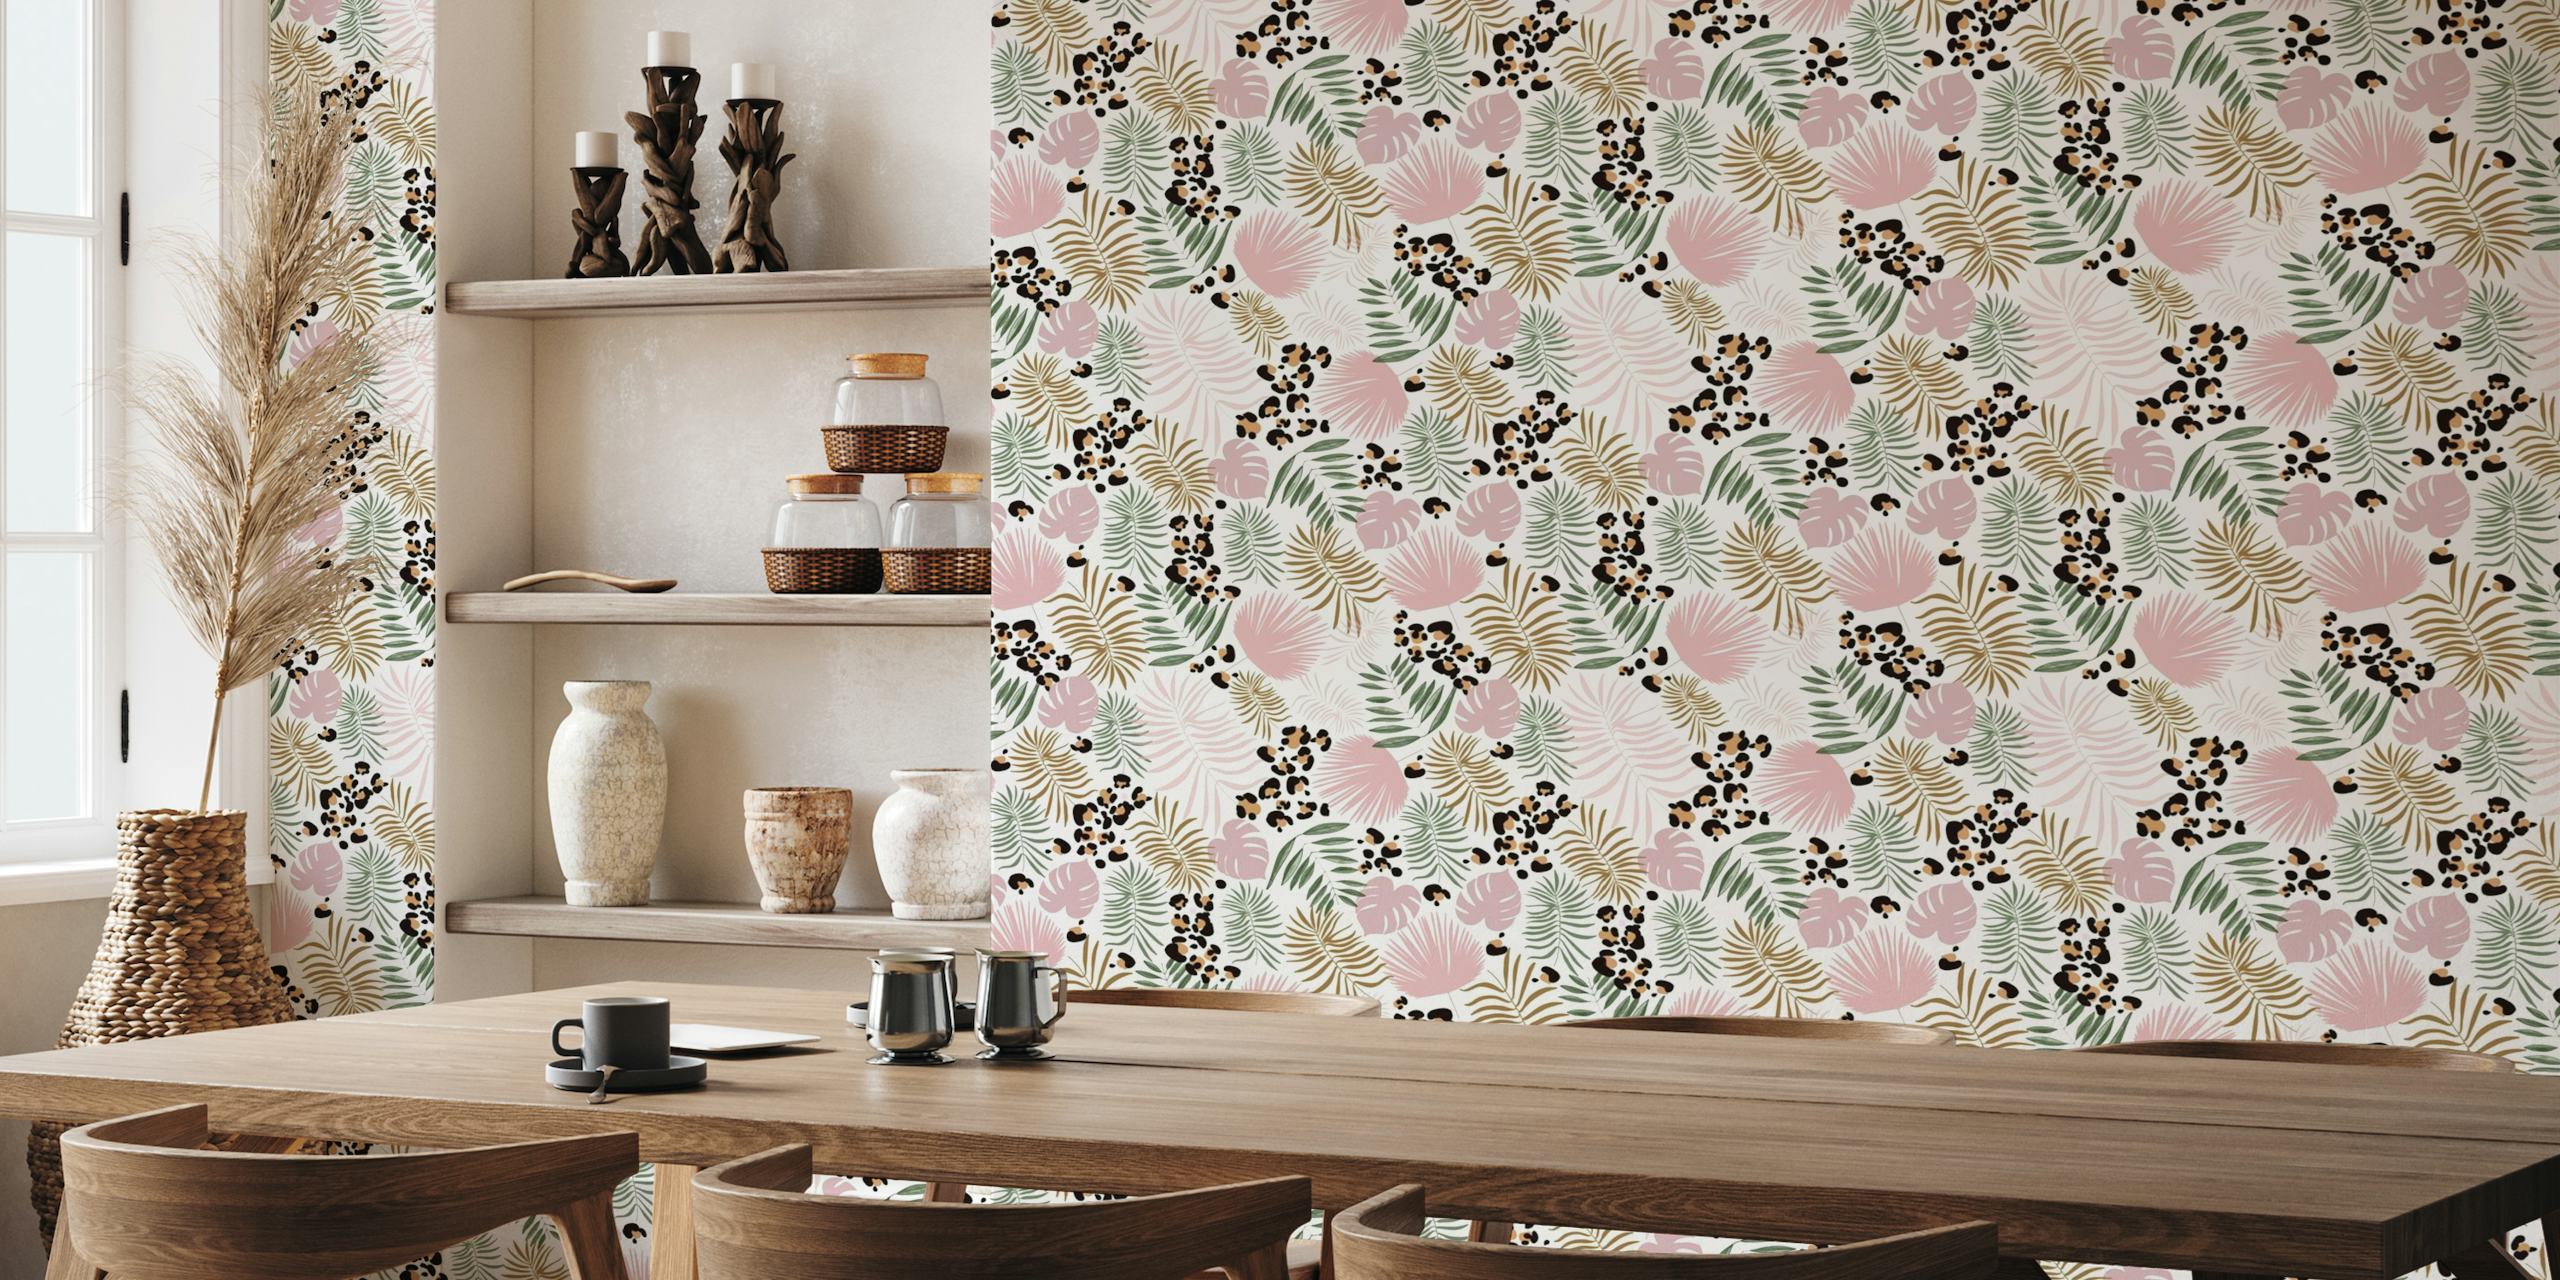 Leopard print with tropical pattern wallpaper